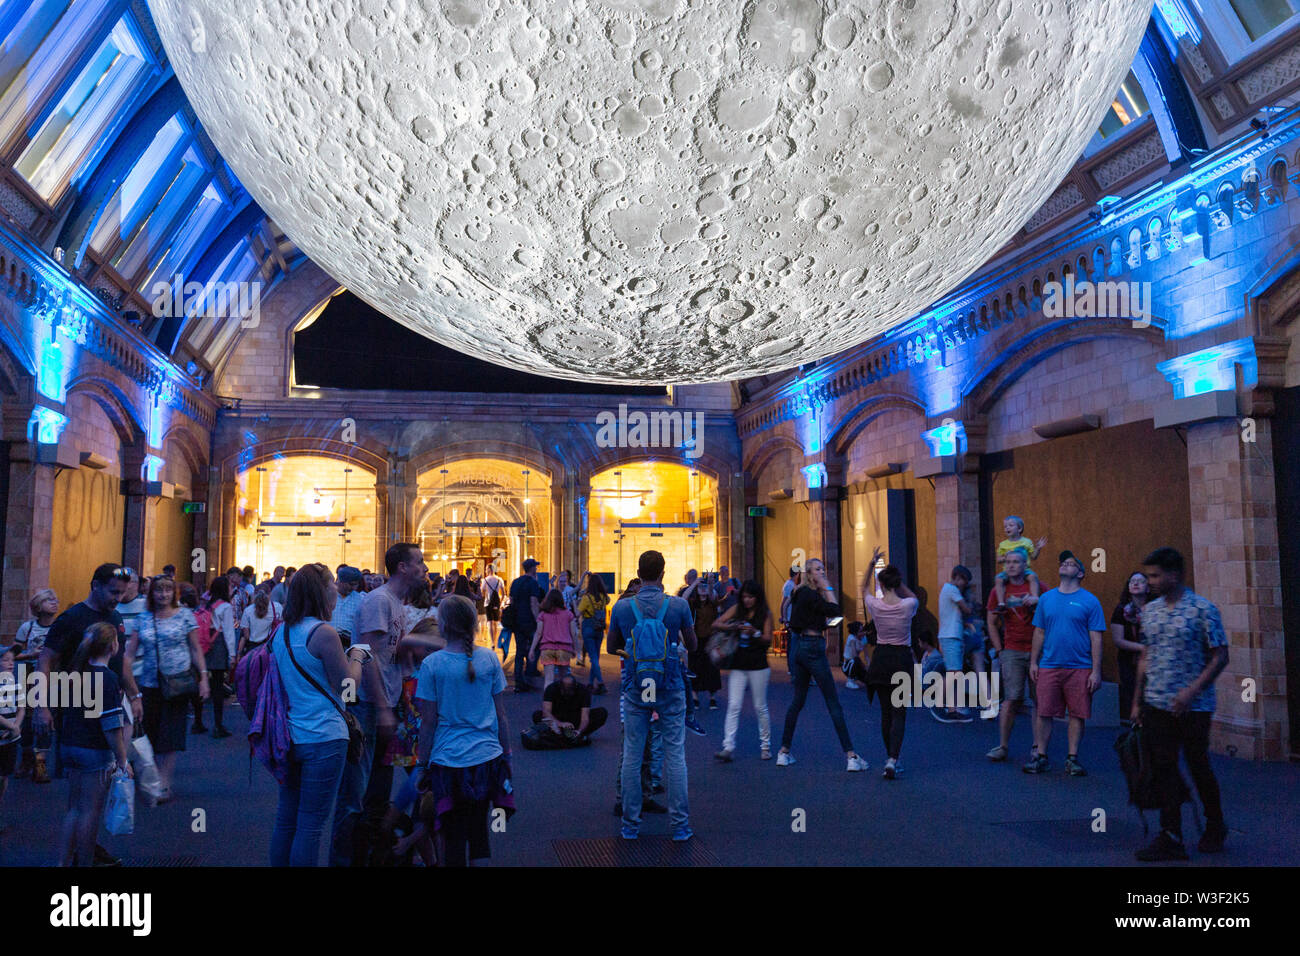 Museum of the Moon - Exhibition of a model of the moon by artist Luke Jerram; Natural History Museum, London UK Stock Photo